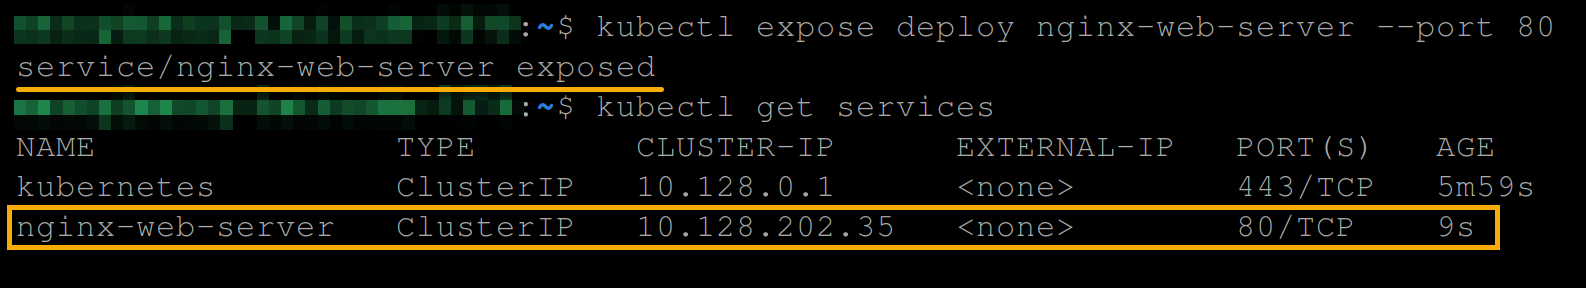 Exposing the NGINX (nginx-web-server) deployment as a ClusterIP service type